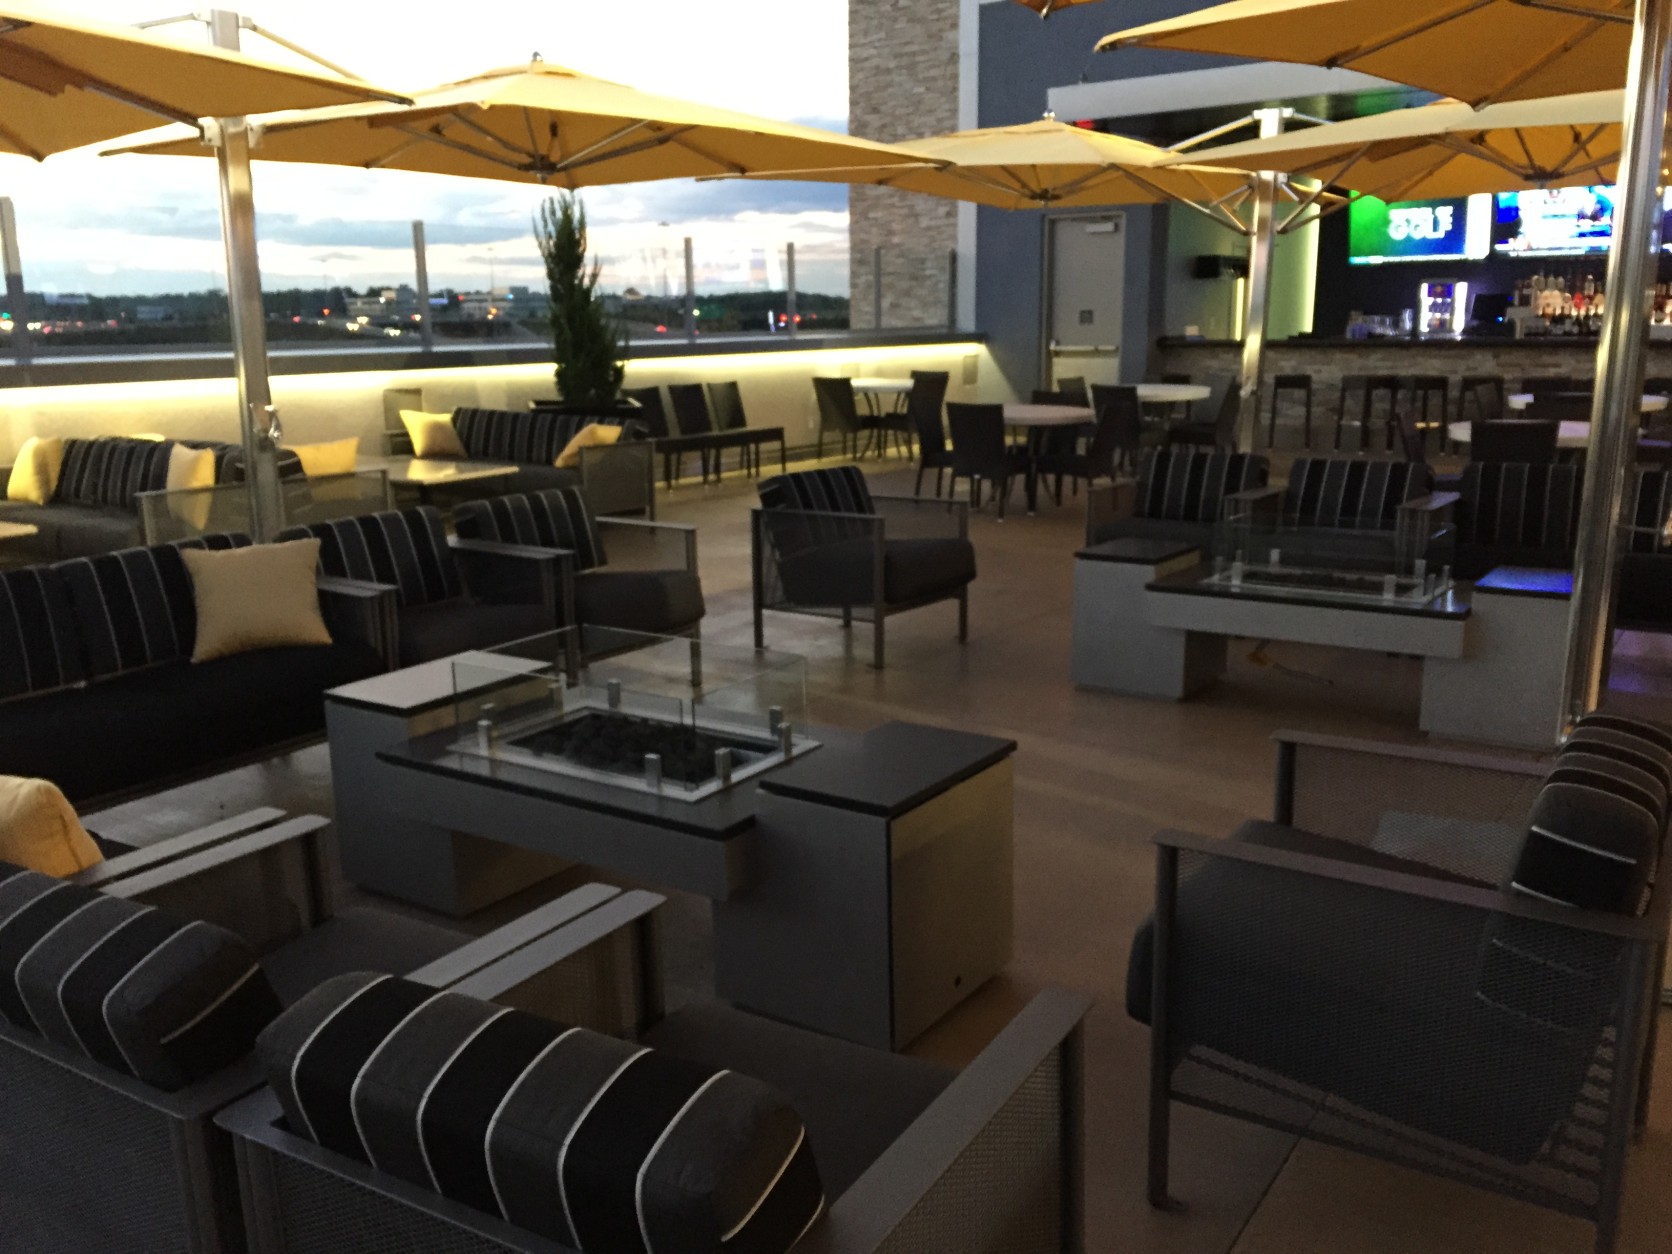 The rooftop terrace (on the third level) has a bar, a stage for a DJ and two fire pits. (WTOP/Michelle Basch)